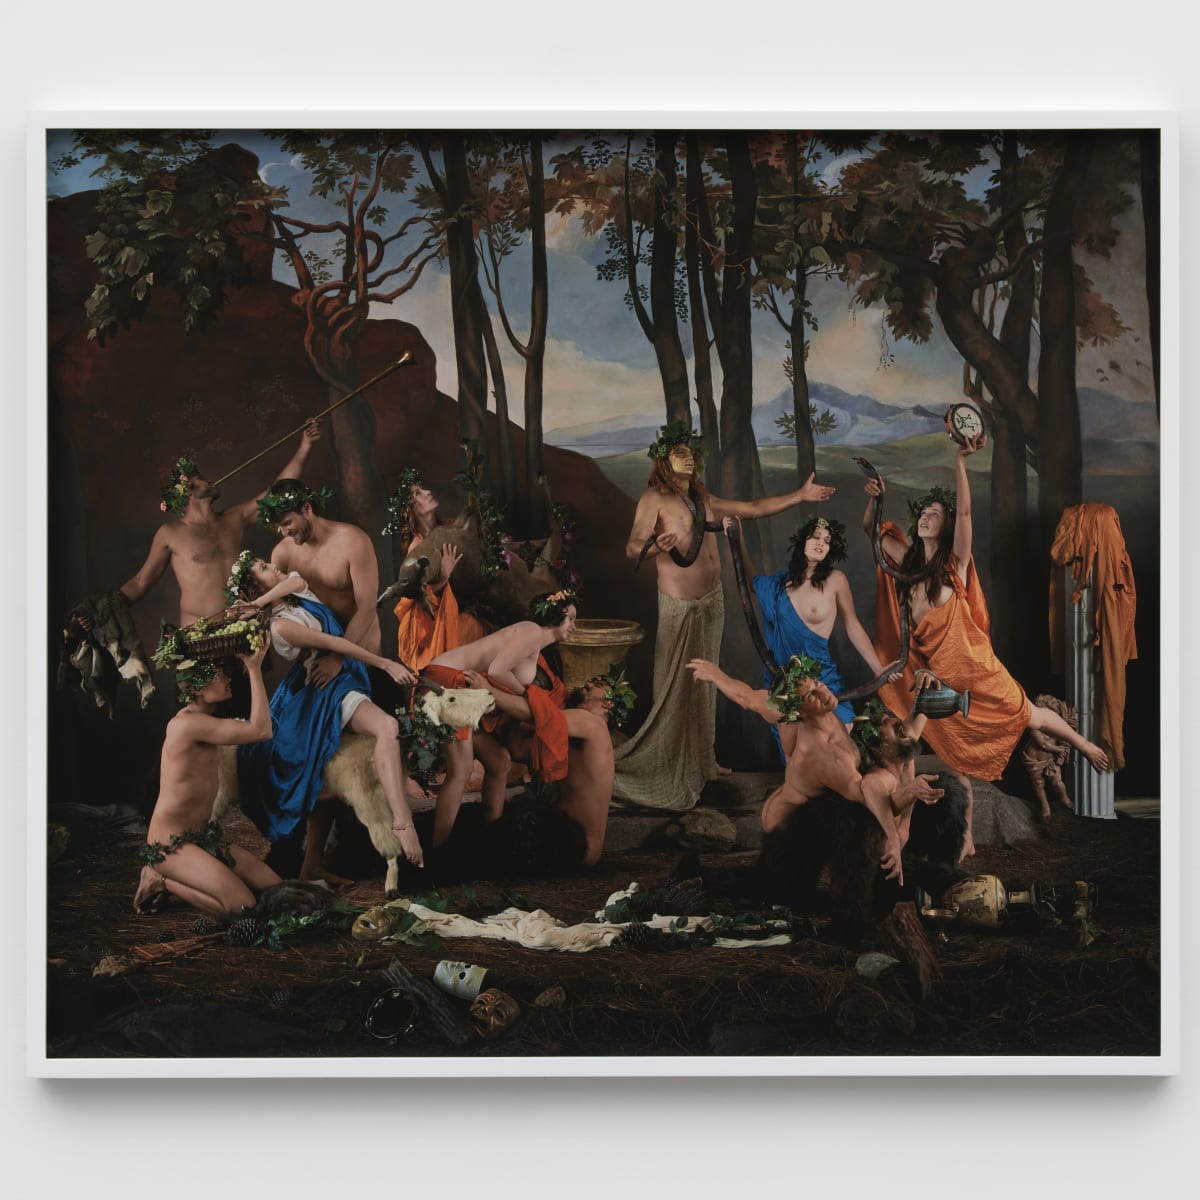 Eleanor ANTIN, The Triumph of Pan (after Poussin) (from Roman Allegories), 2004